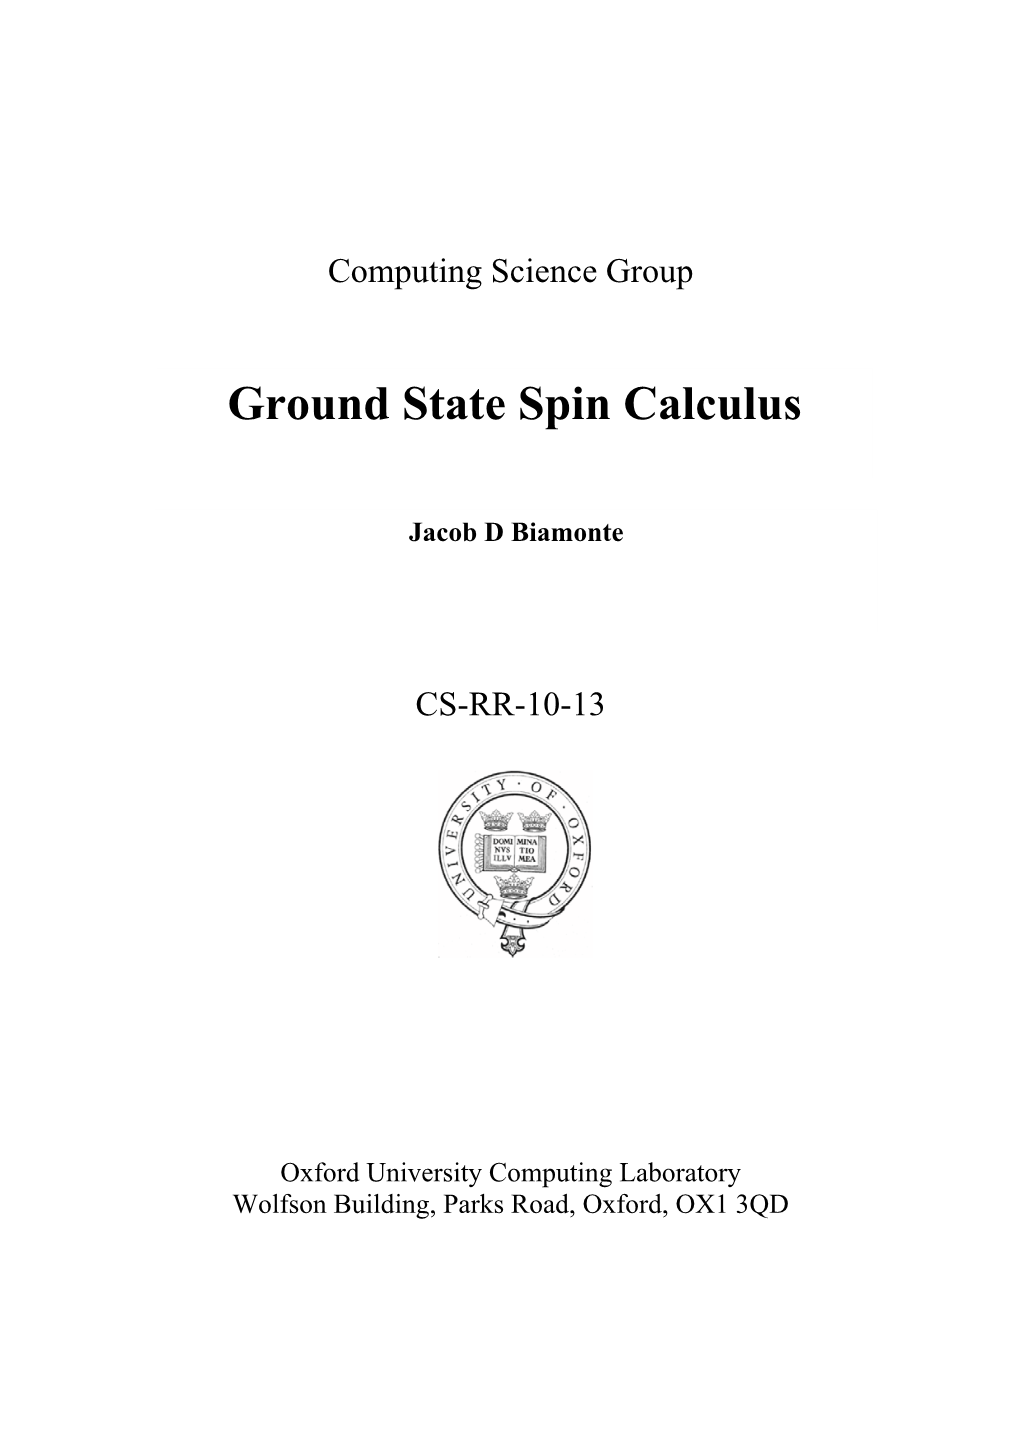 Ground State Spin Calculus